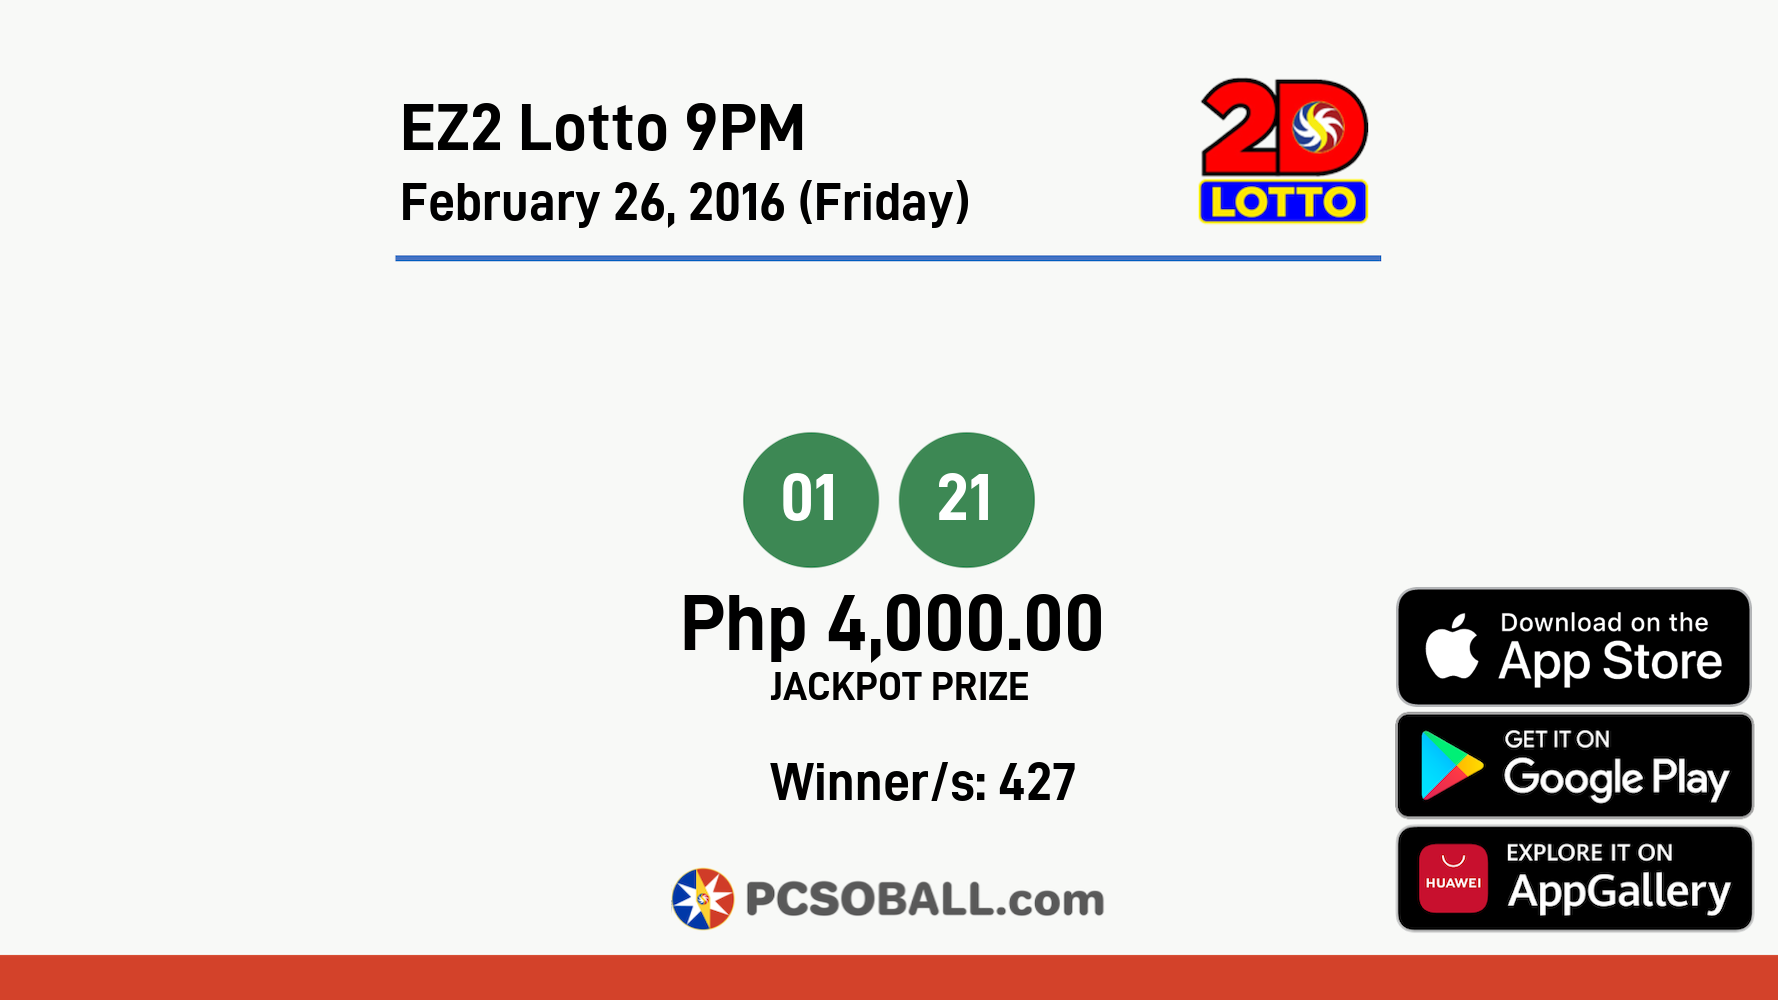 EZ2 Lotto 9PM February 26, 2016 (Friday) Result